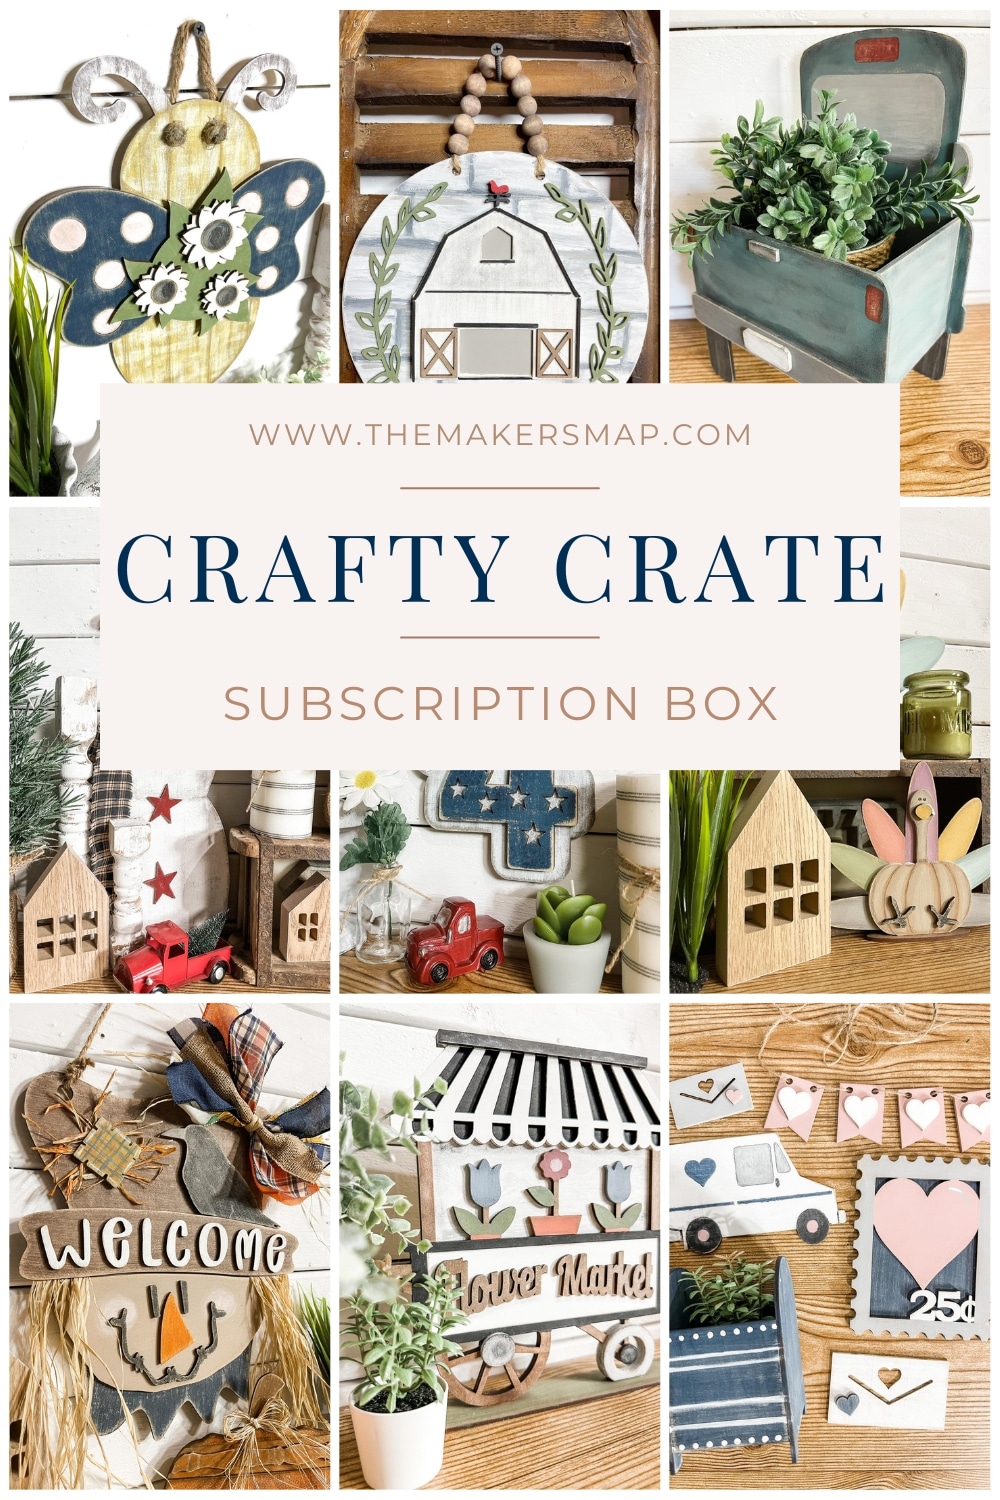 Crafty Crate Subscription Box